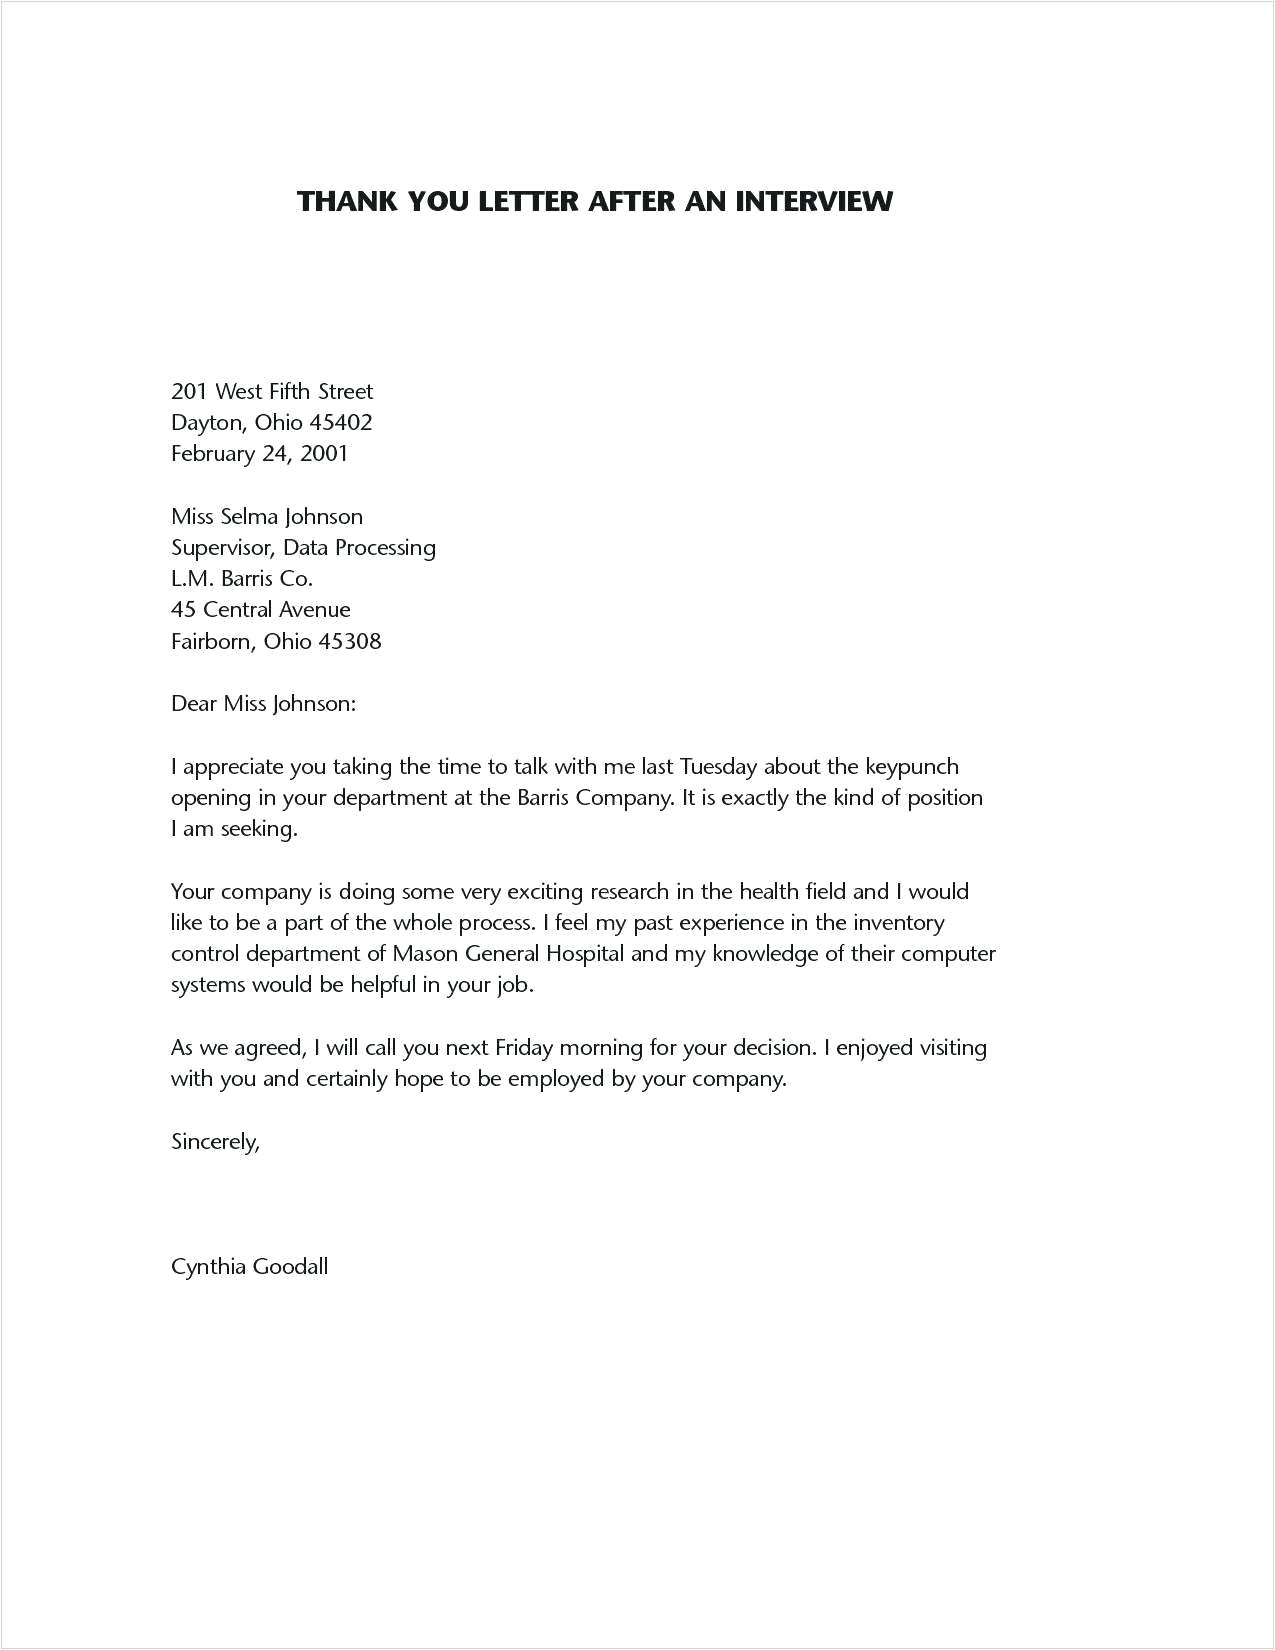 job interview thank you note example